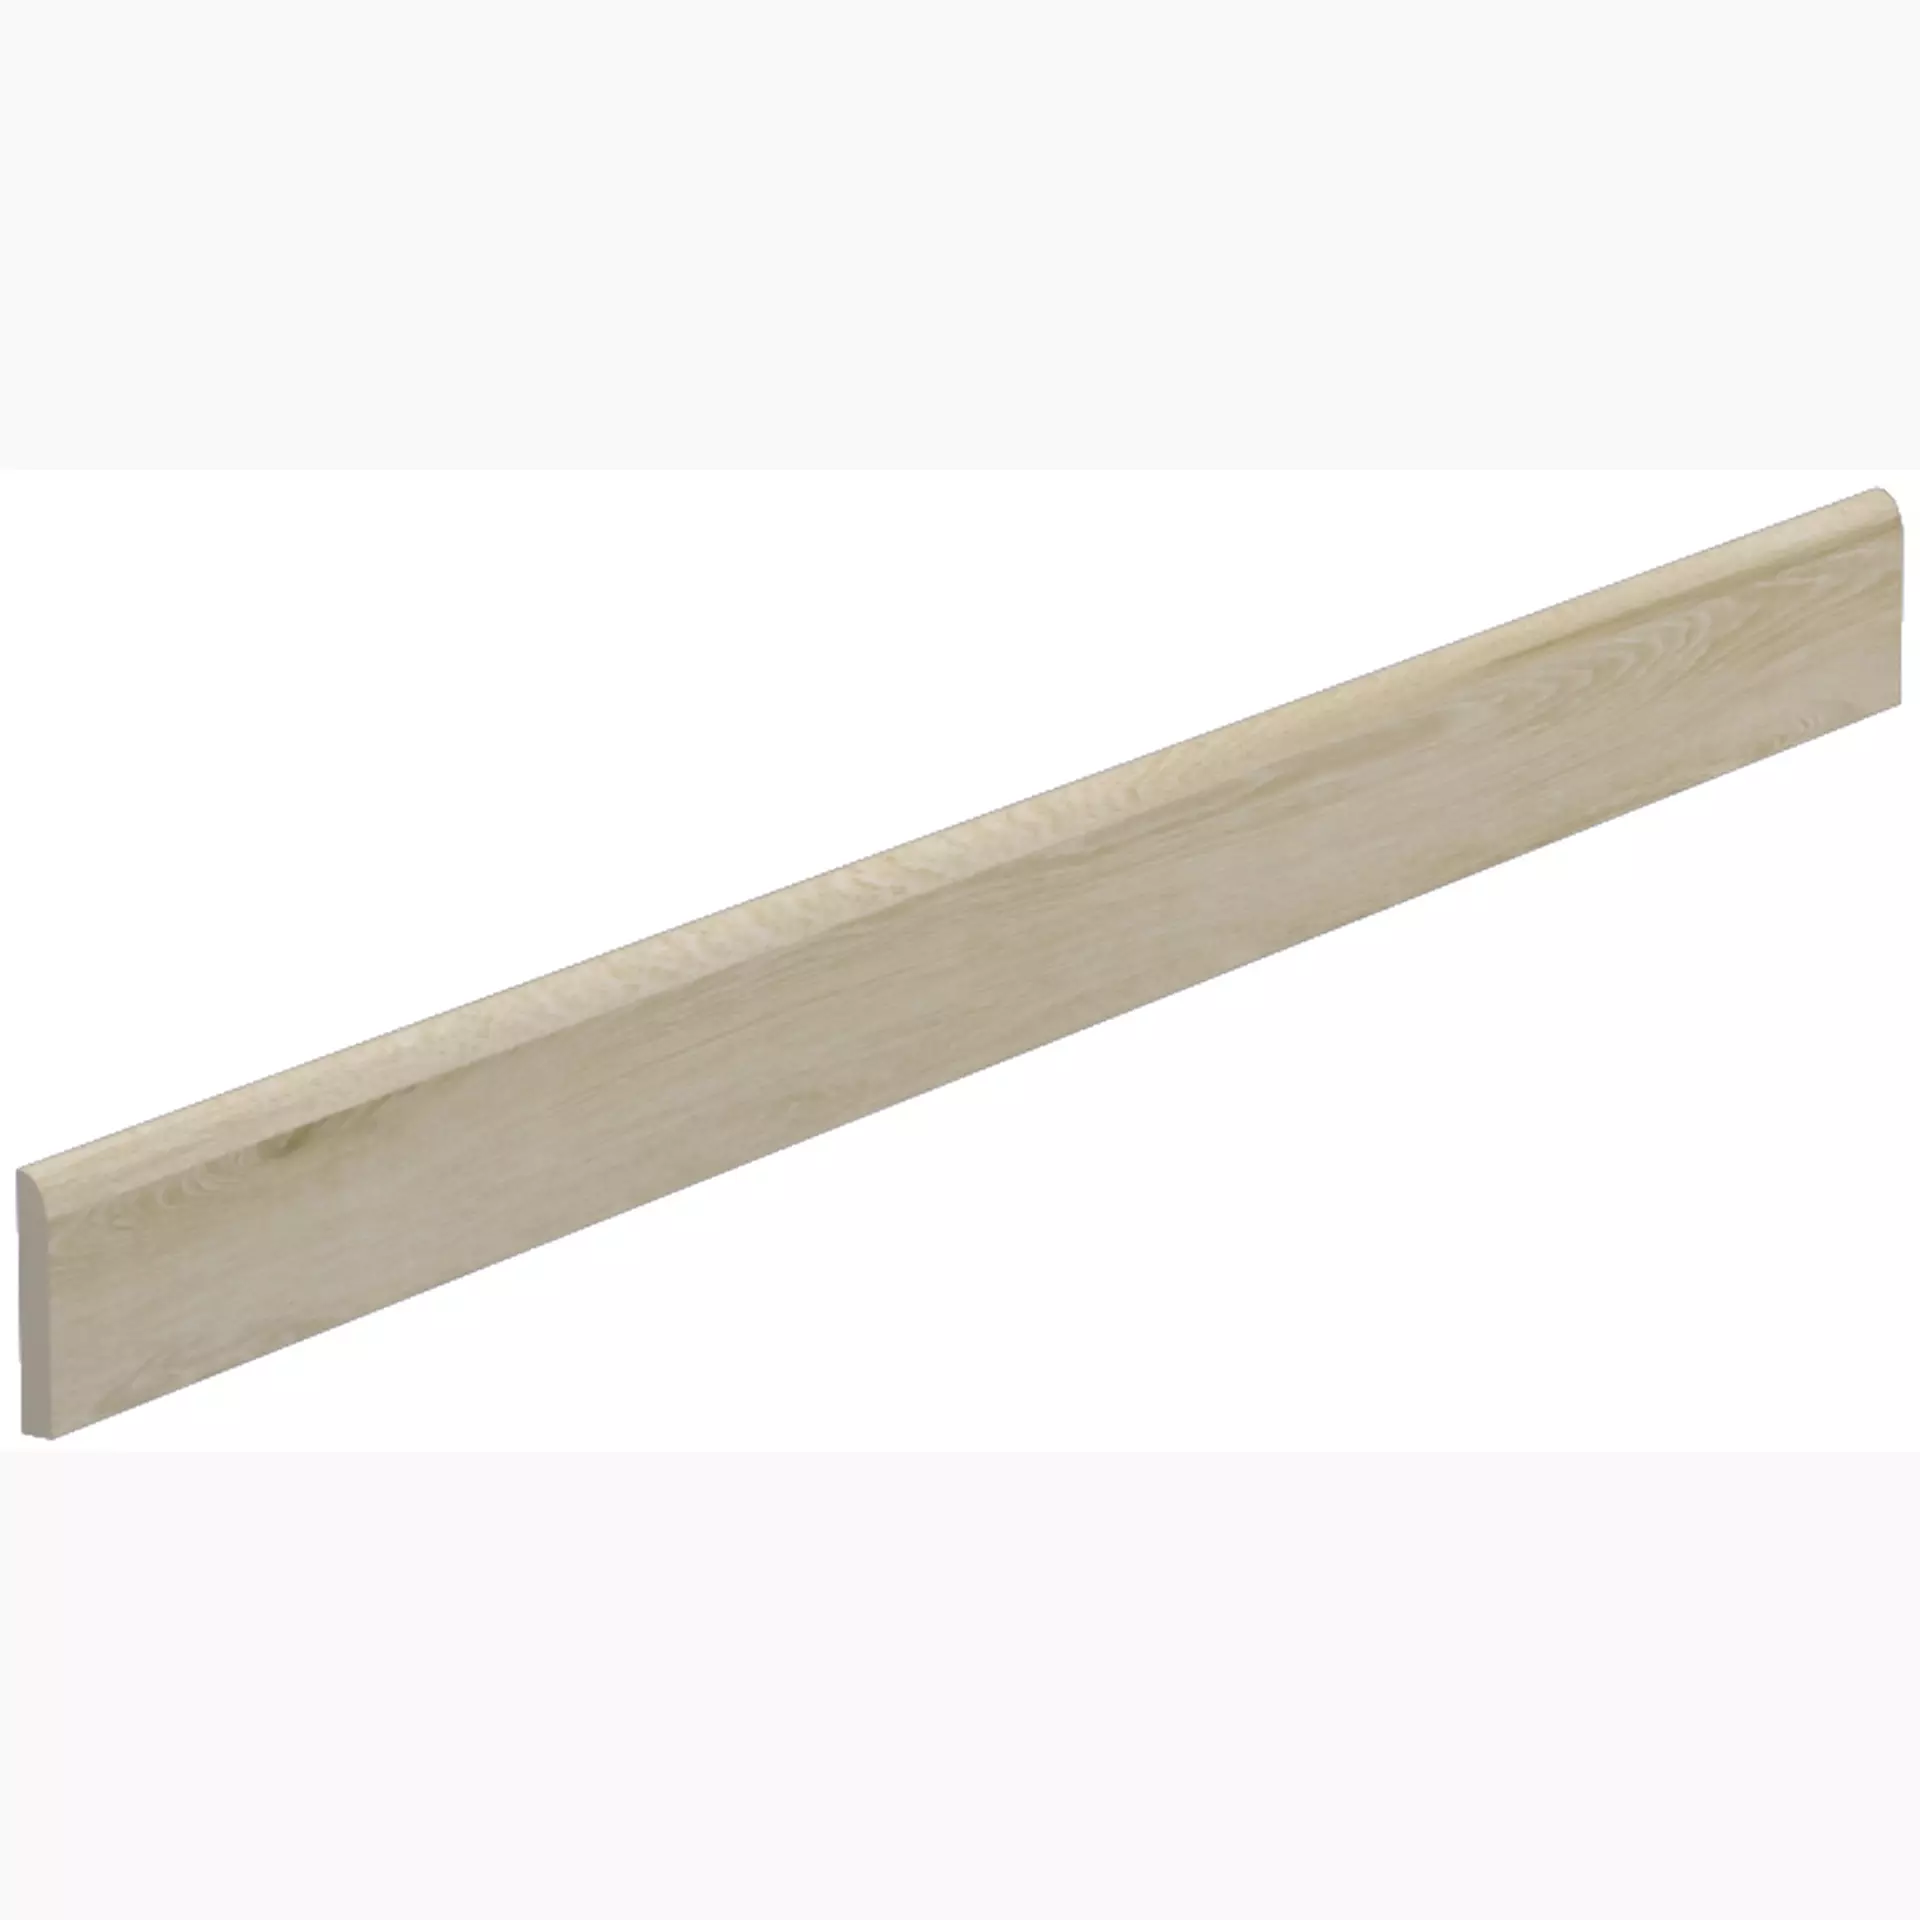 Del Conca Nb Nabi Taupe Nb3 Naturale Skirting board 13NB03R90 6,5x90cm rectified 8,5mm